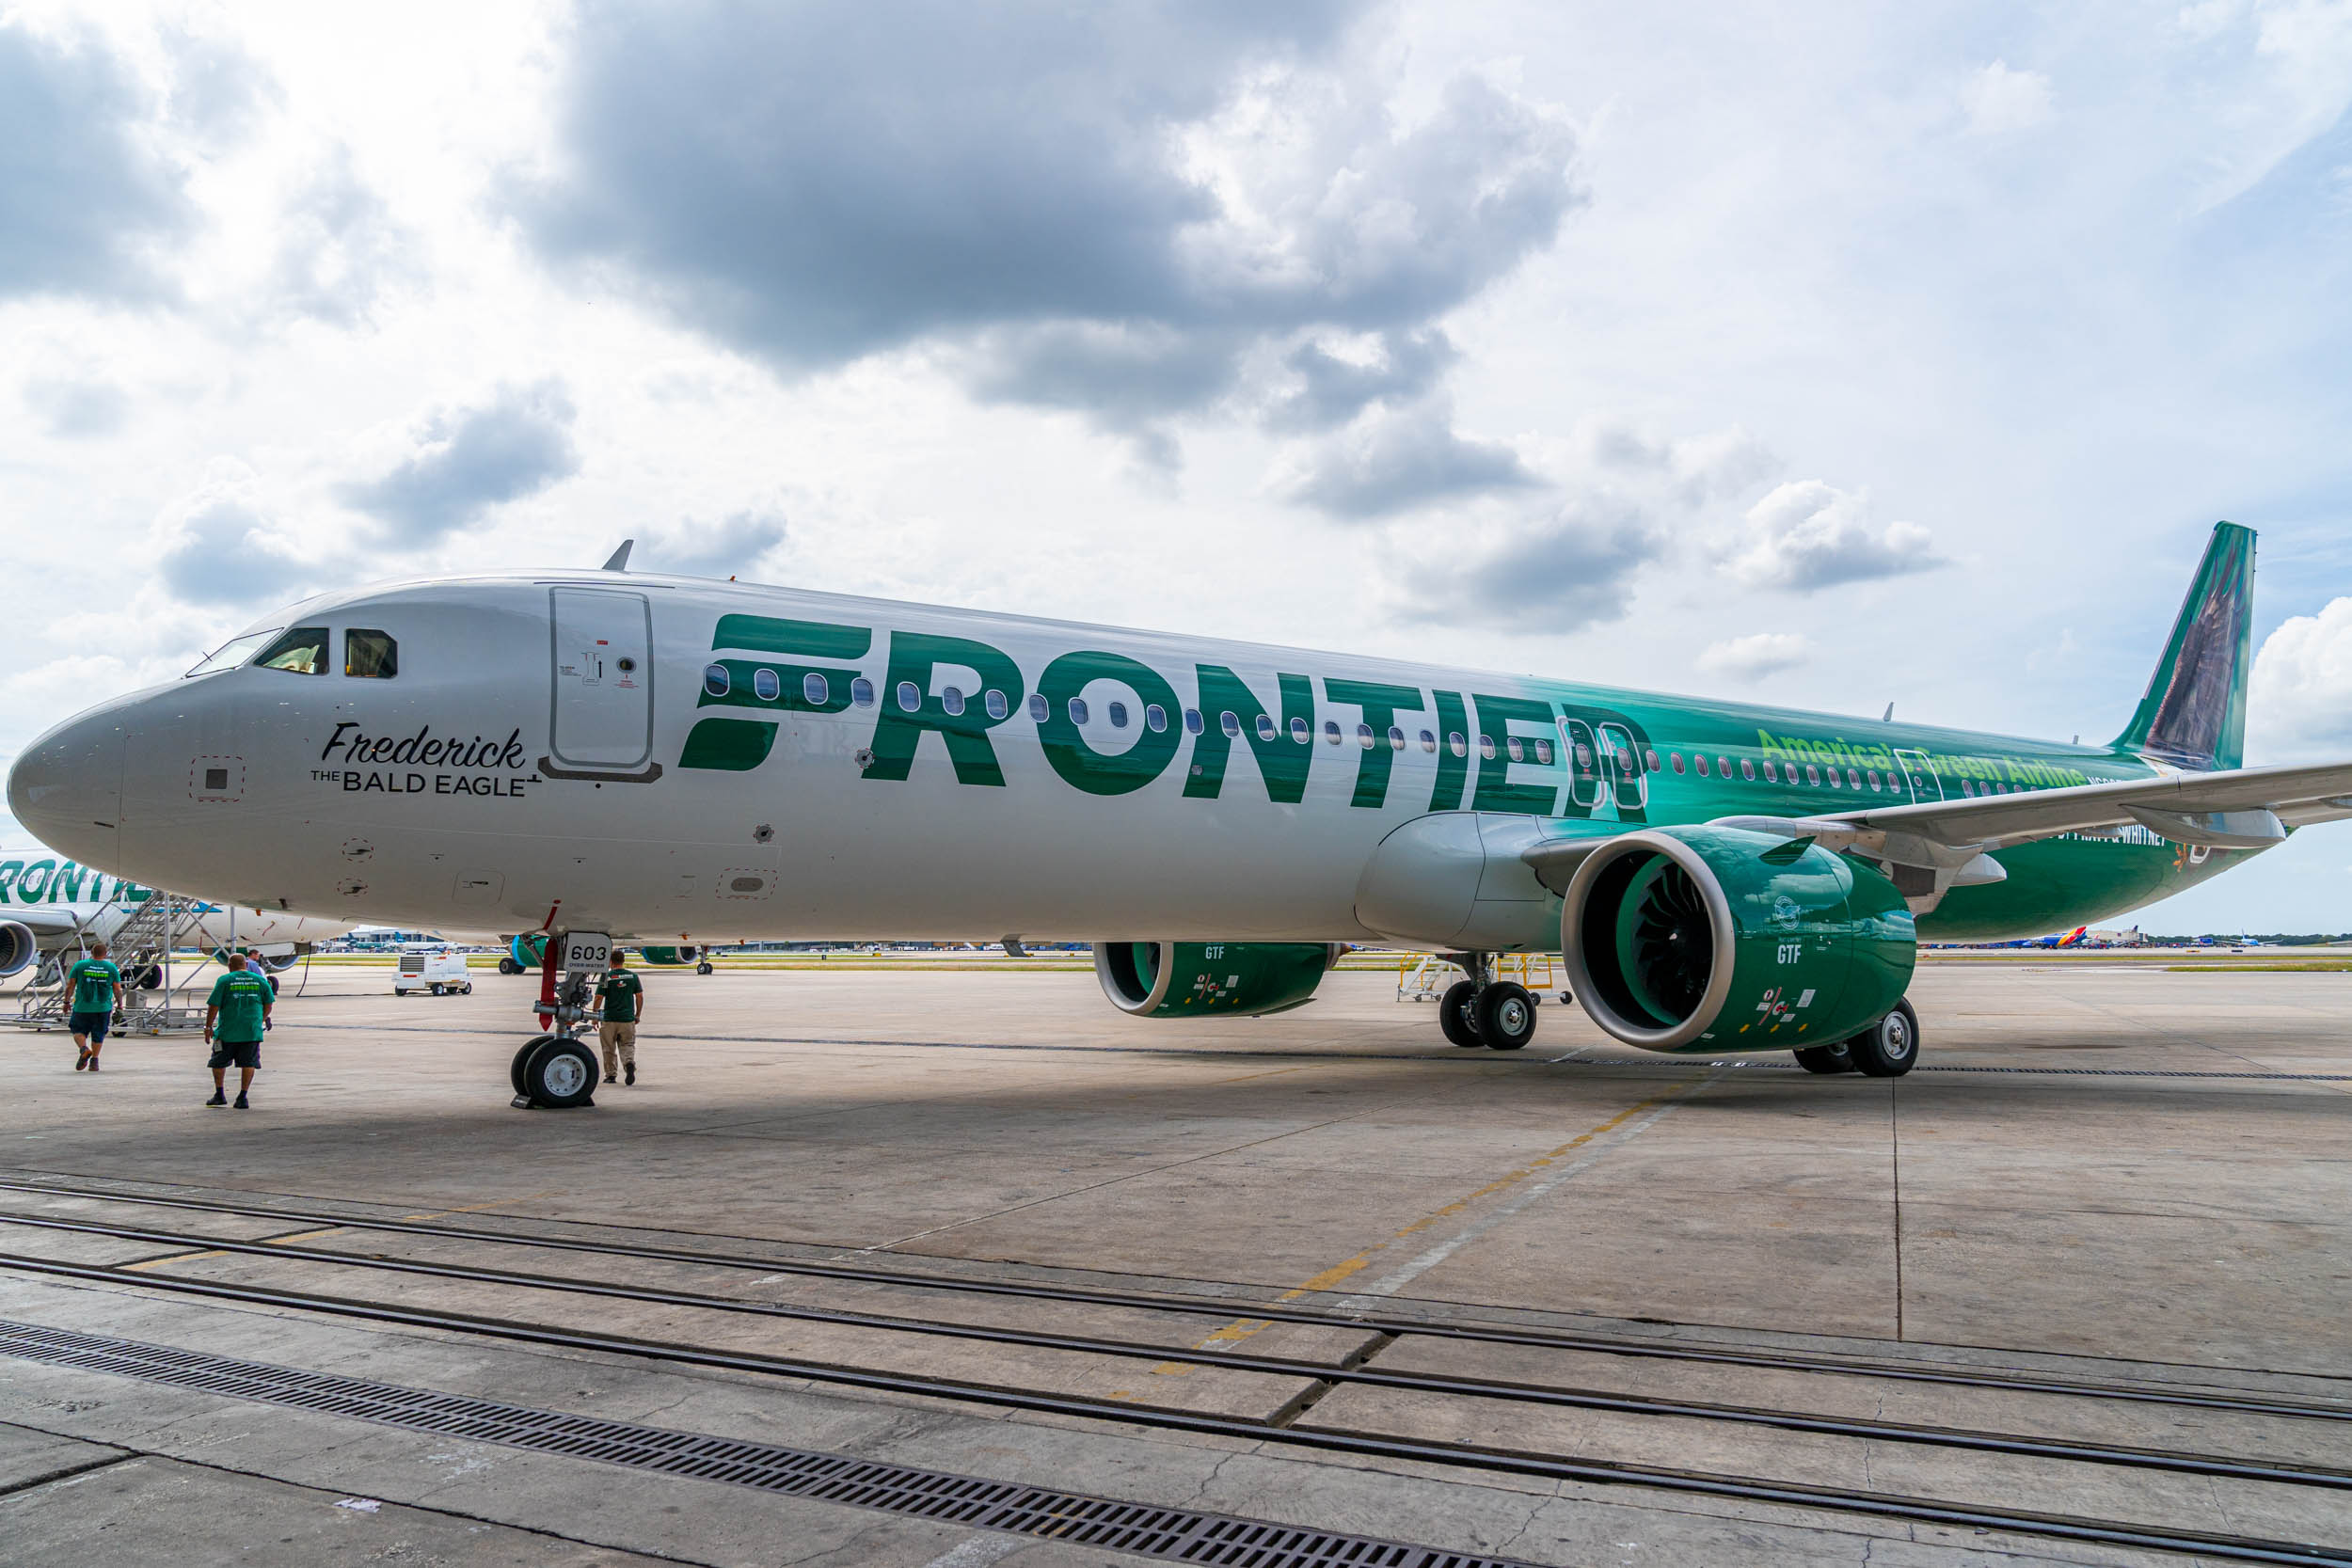 A new unlimited all-you-can-fly pass coming to Frontier Airlines